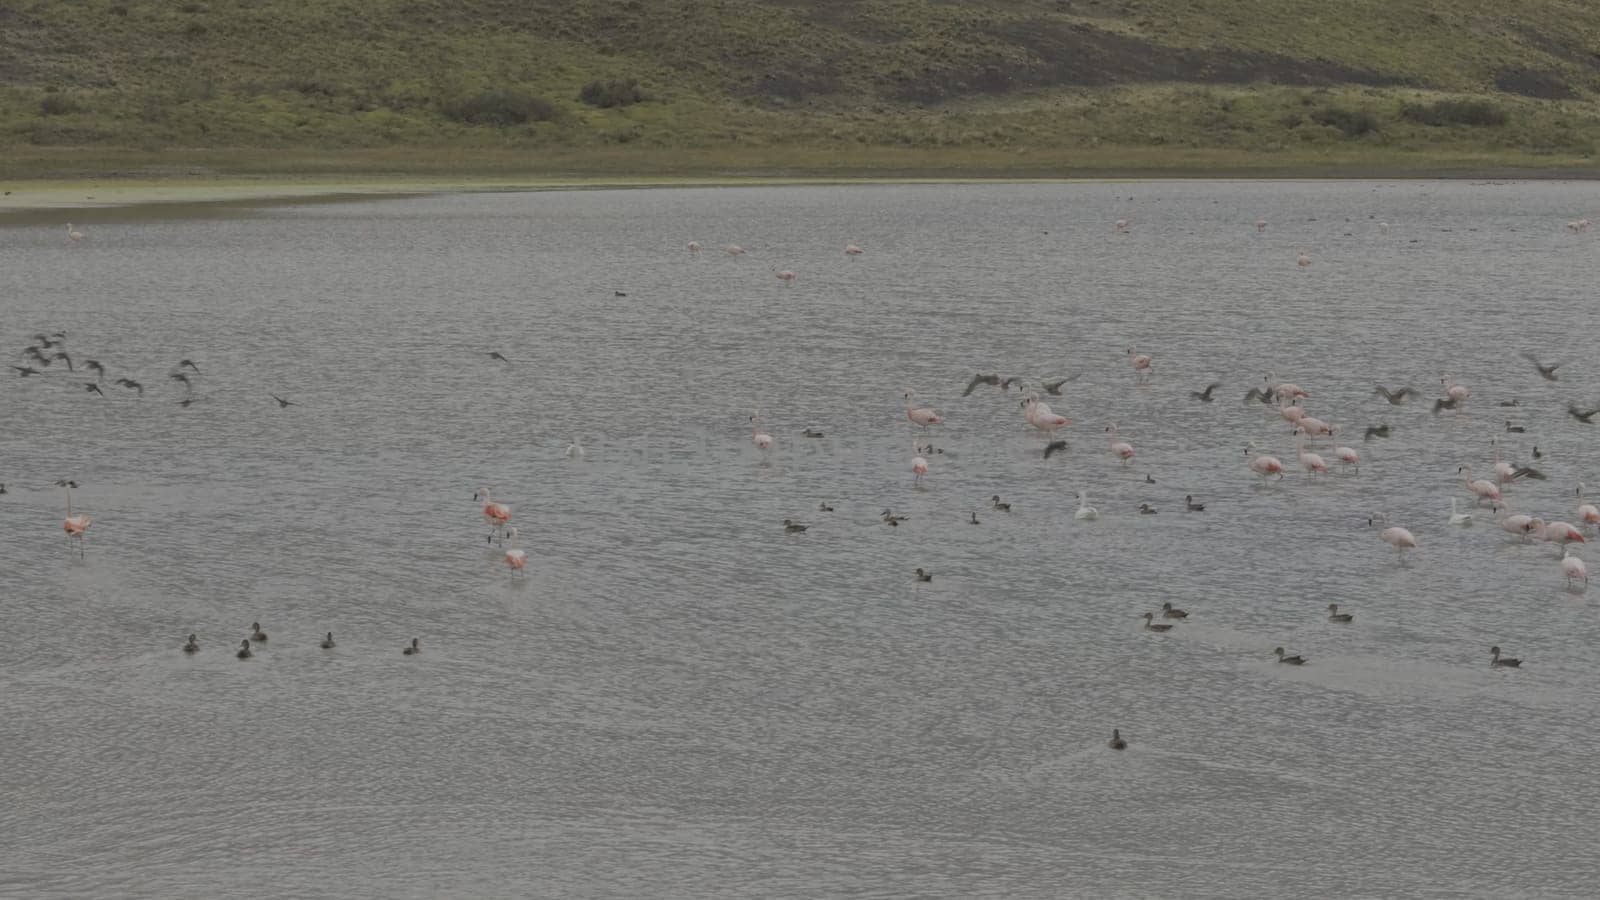 Slow Motion of Flamingos and Birds in a Serene Lagoon by FerradalFCG